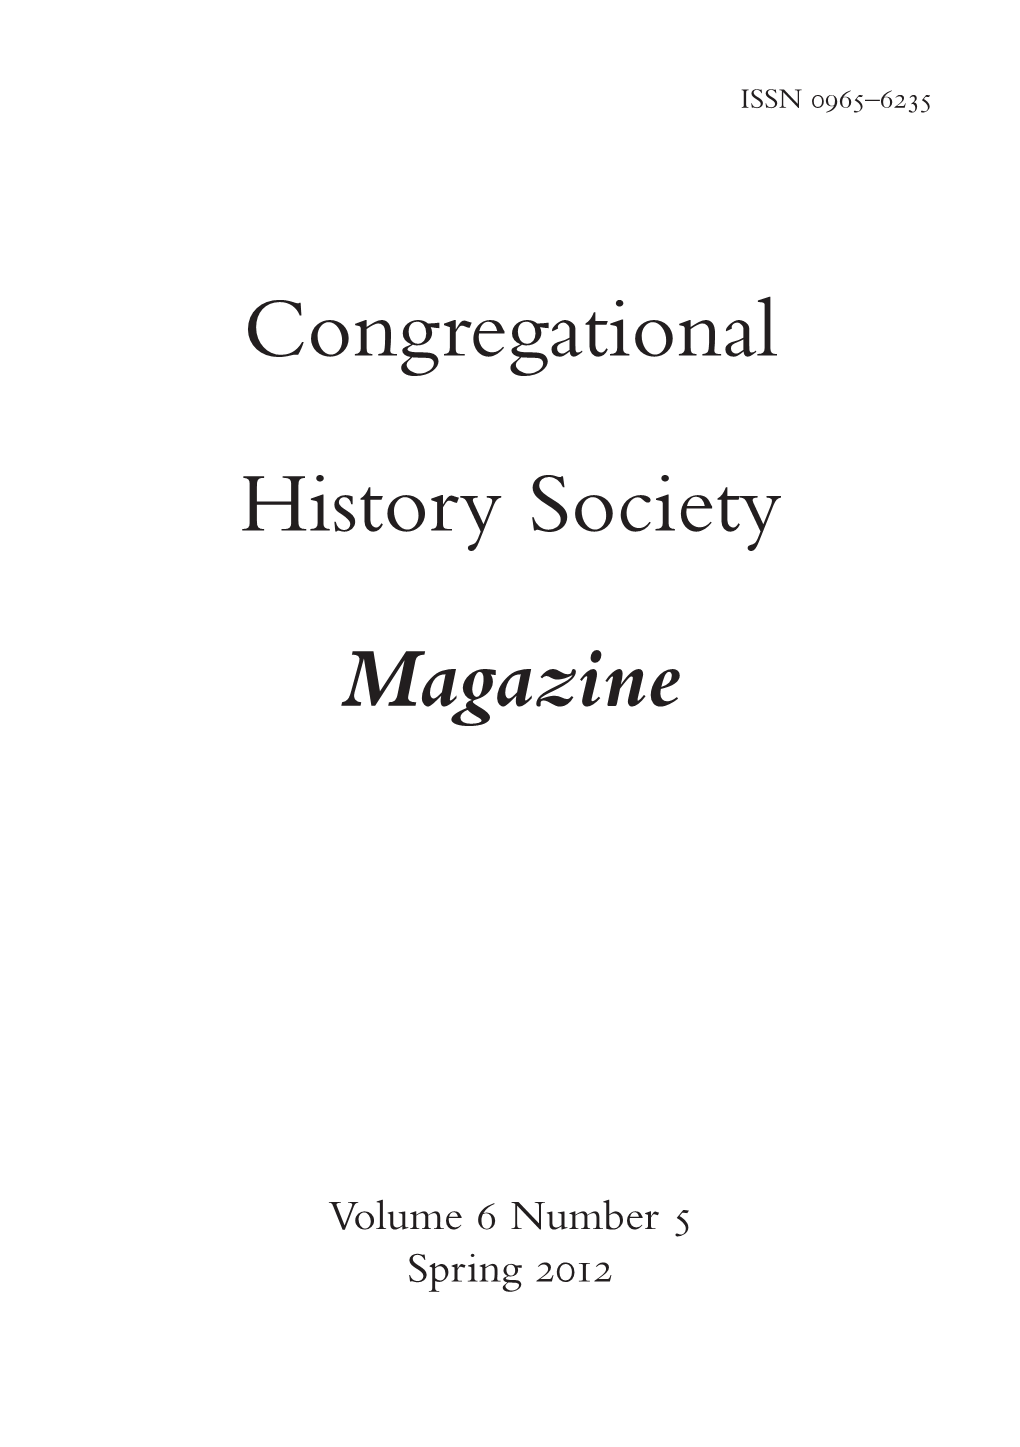 Congregational History Society Magazine Cover 11 April 2012 00:02 Page 1